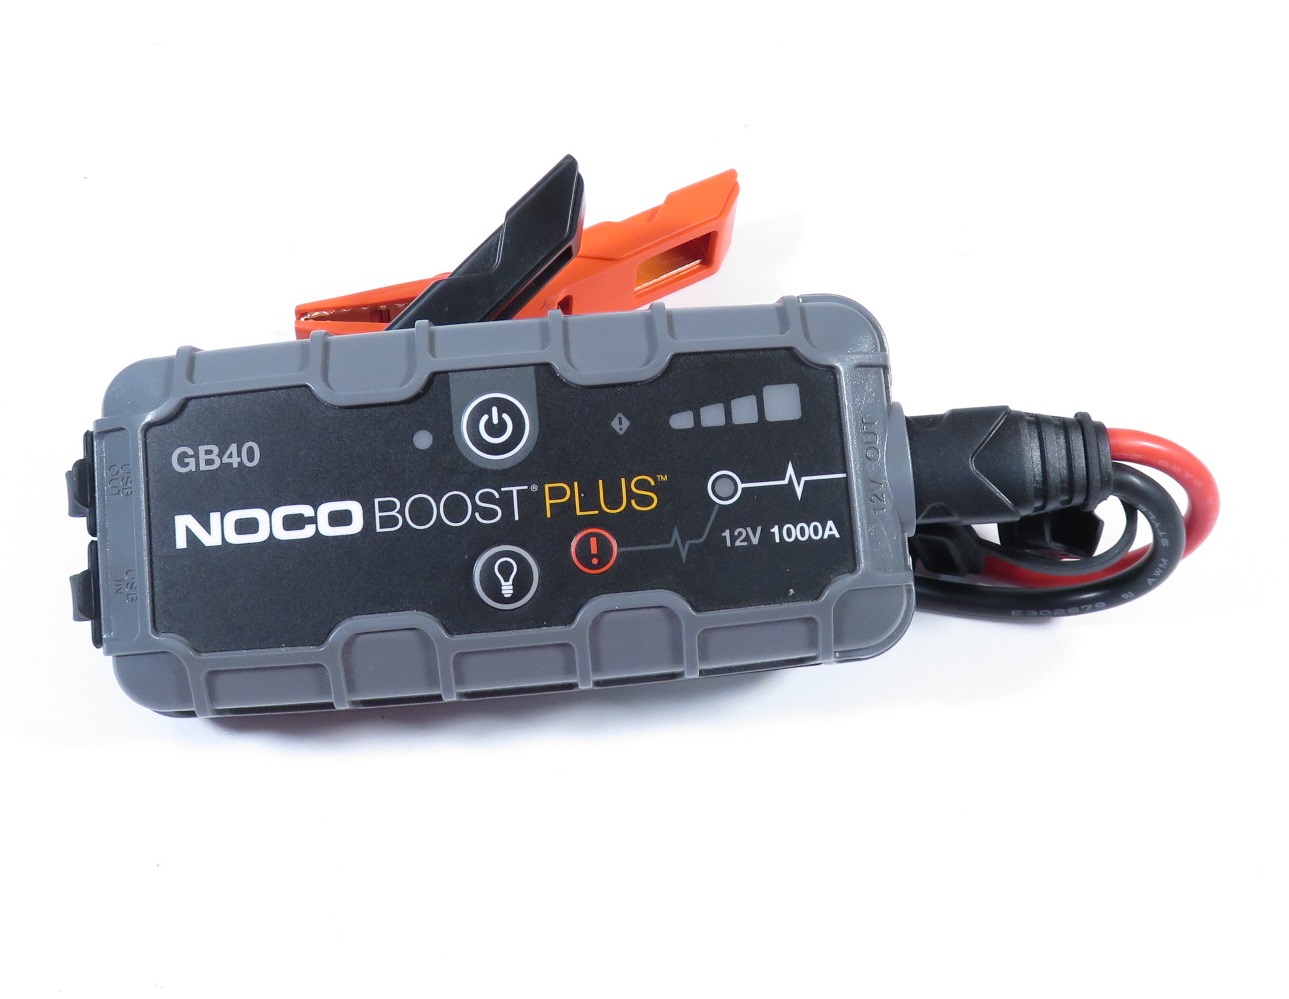 NOCO GB40 Boost Plus 1000A: Ultra Safe Lithium Jump Starter How-to